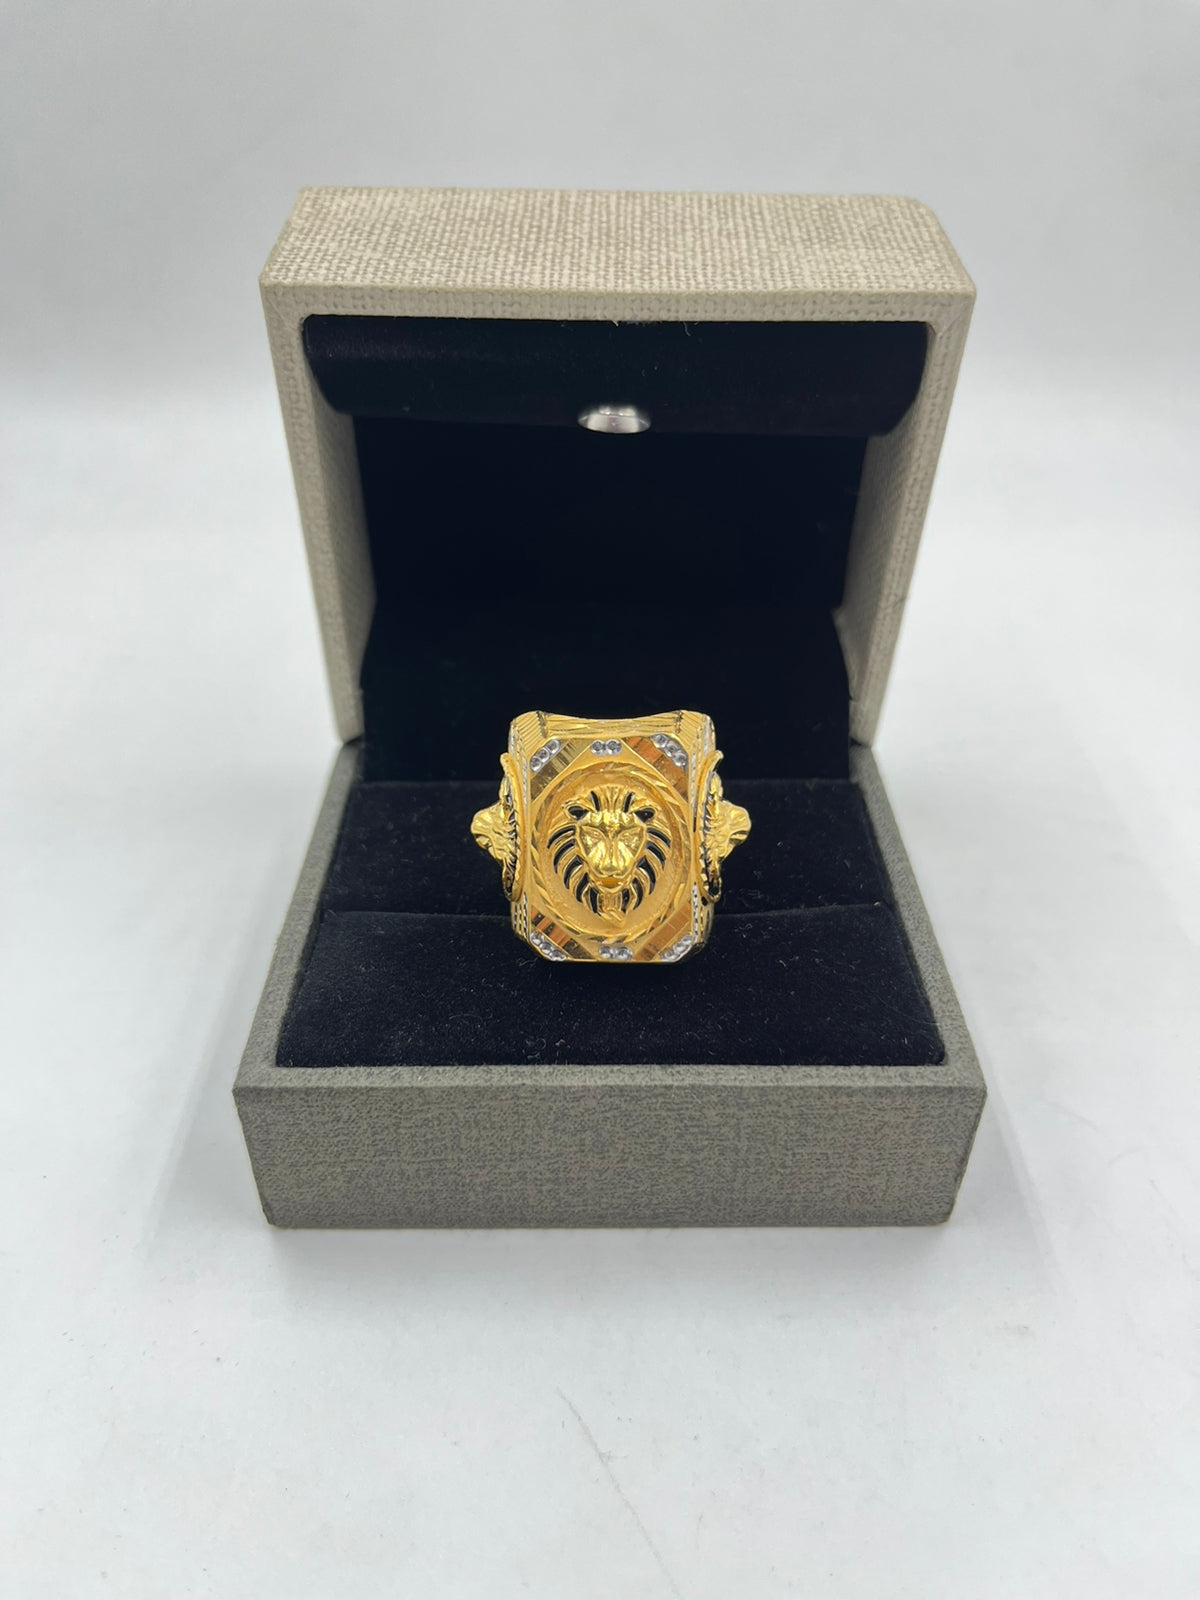 Buy quality 91.6 Gold Surya Design Gents Ring in Ahmedabad